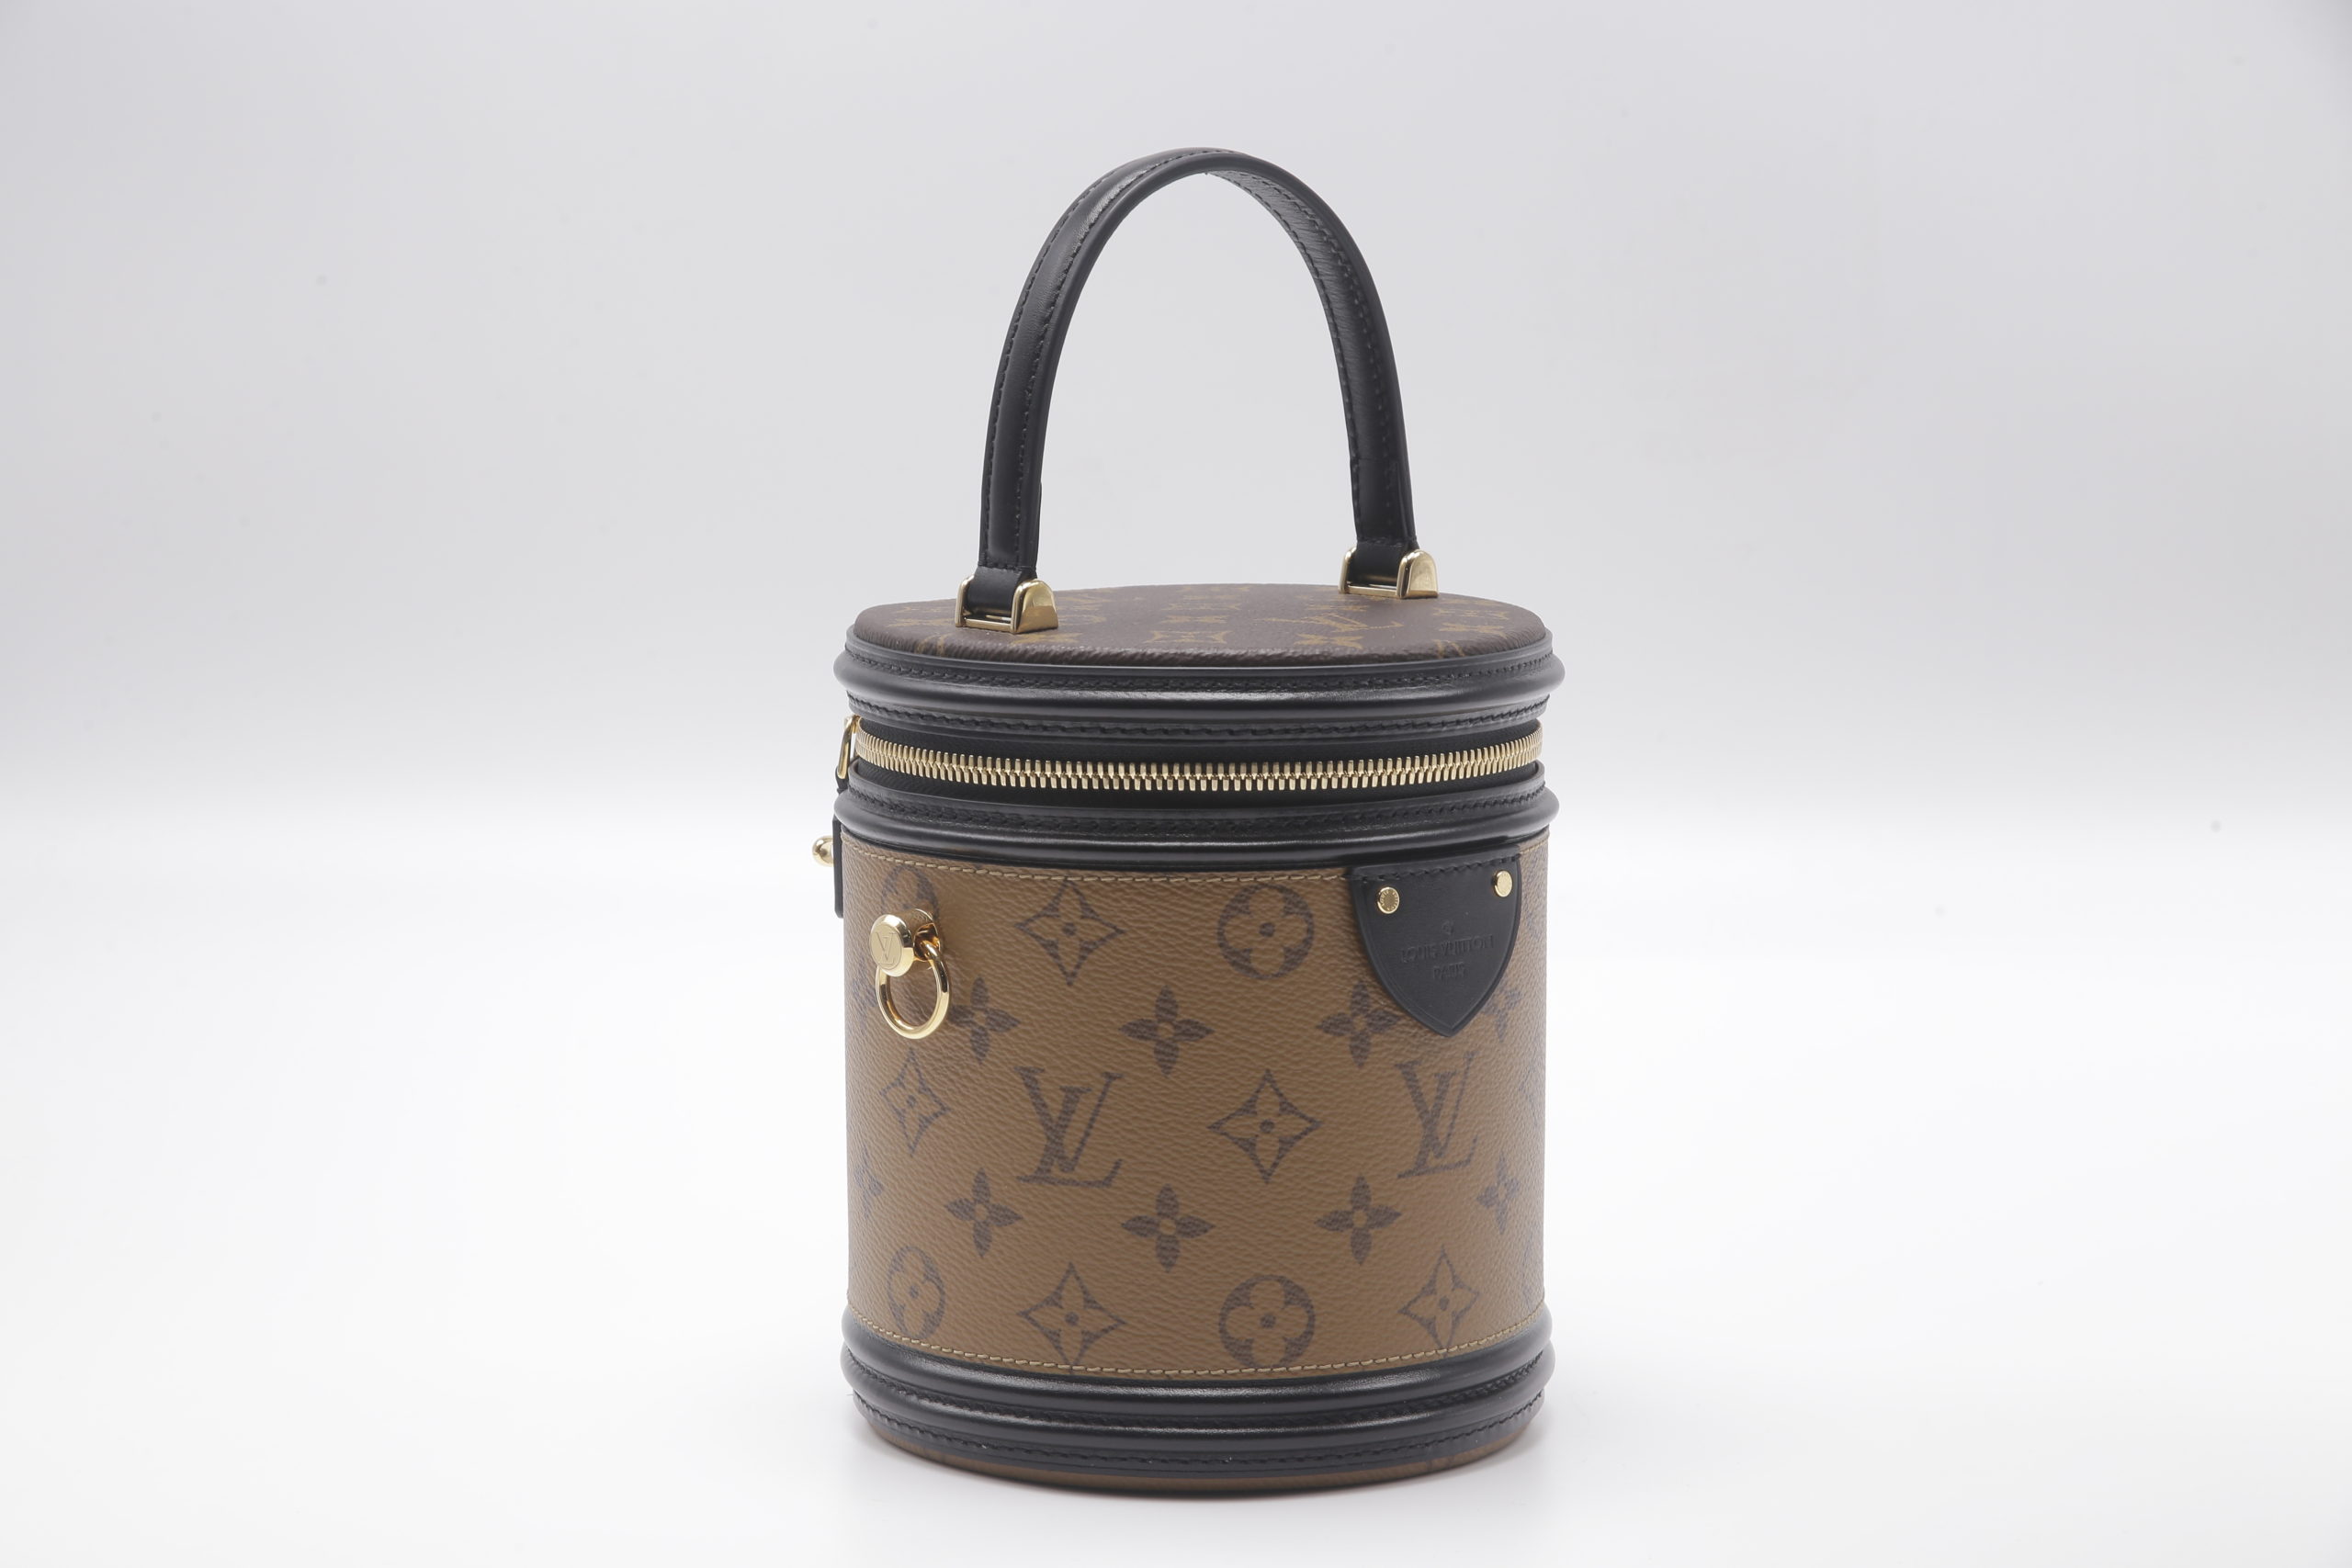 REVIEW: ALL ABOUT THE Louis Vuitton CANNES BAG 2019 (REVERSE